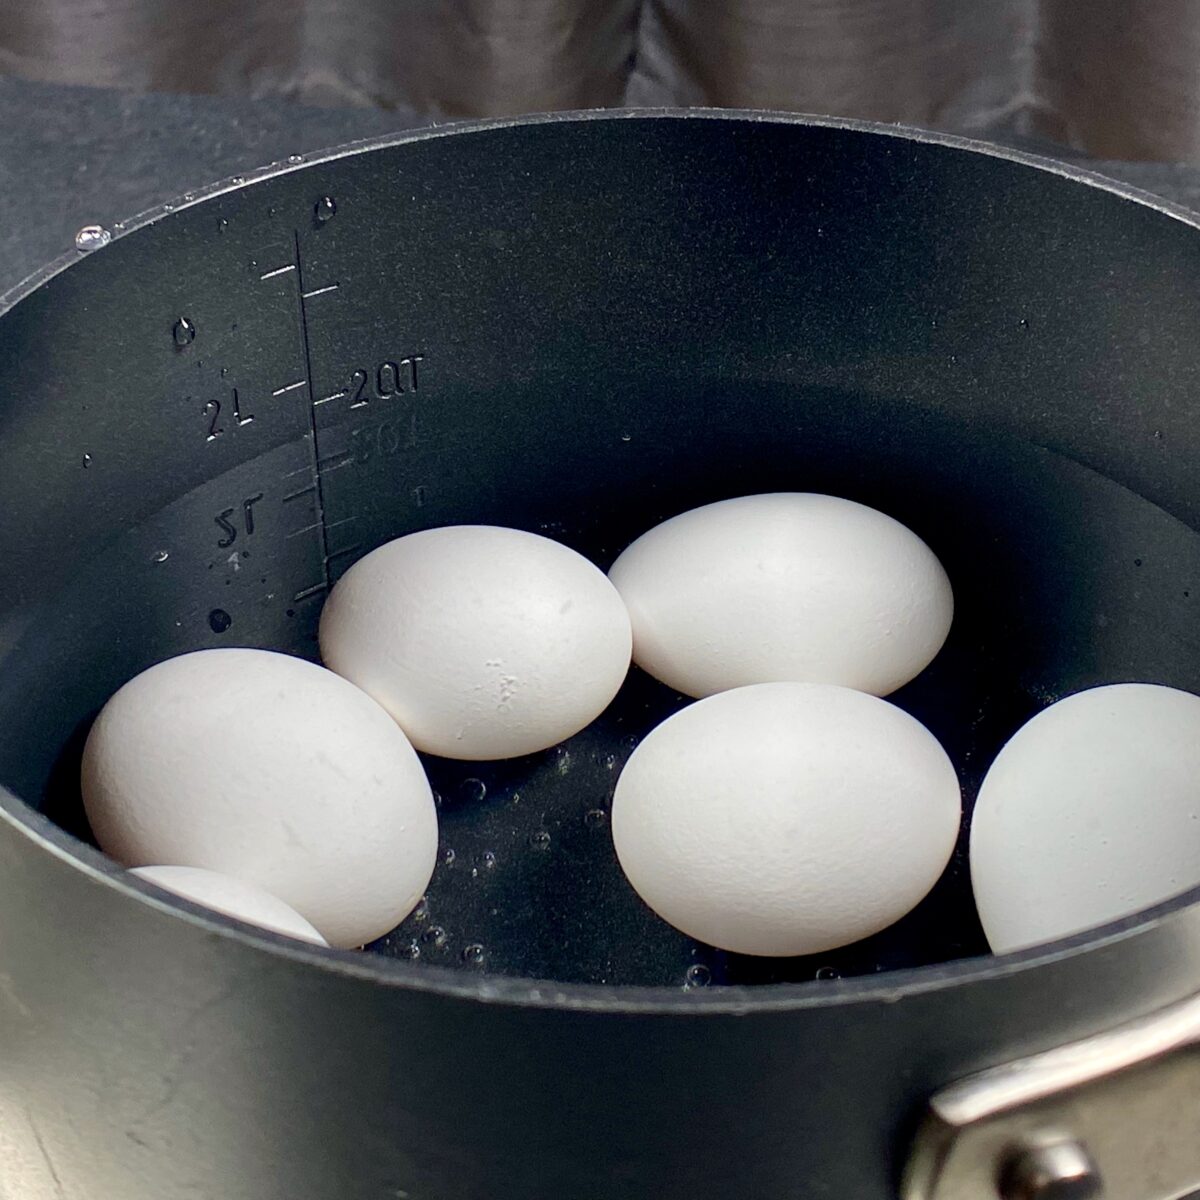 Side view showing water level one inch above the eggs while in a saucepan.